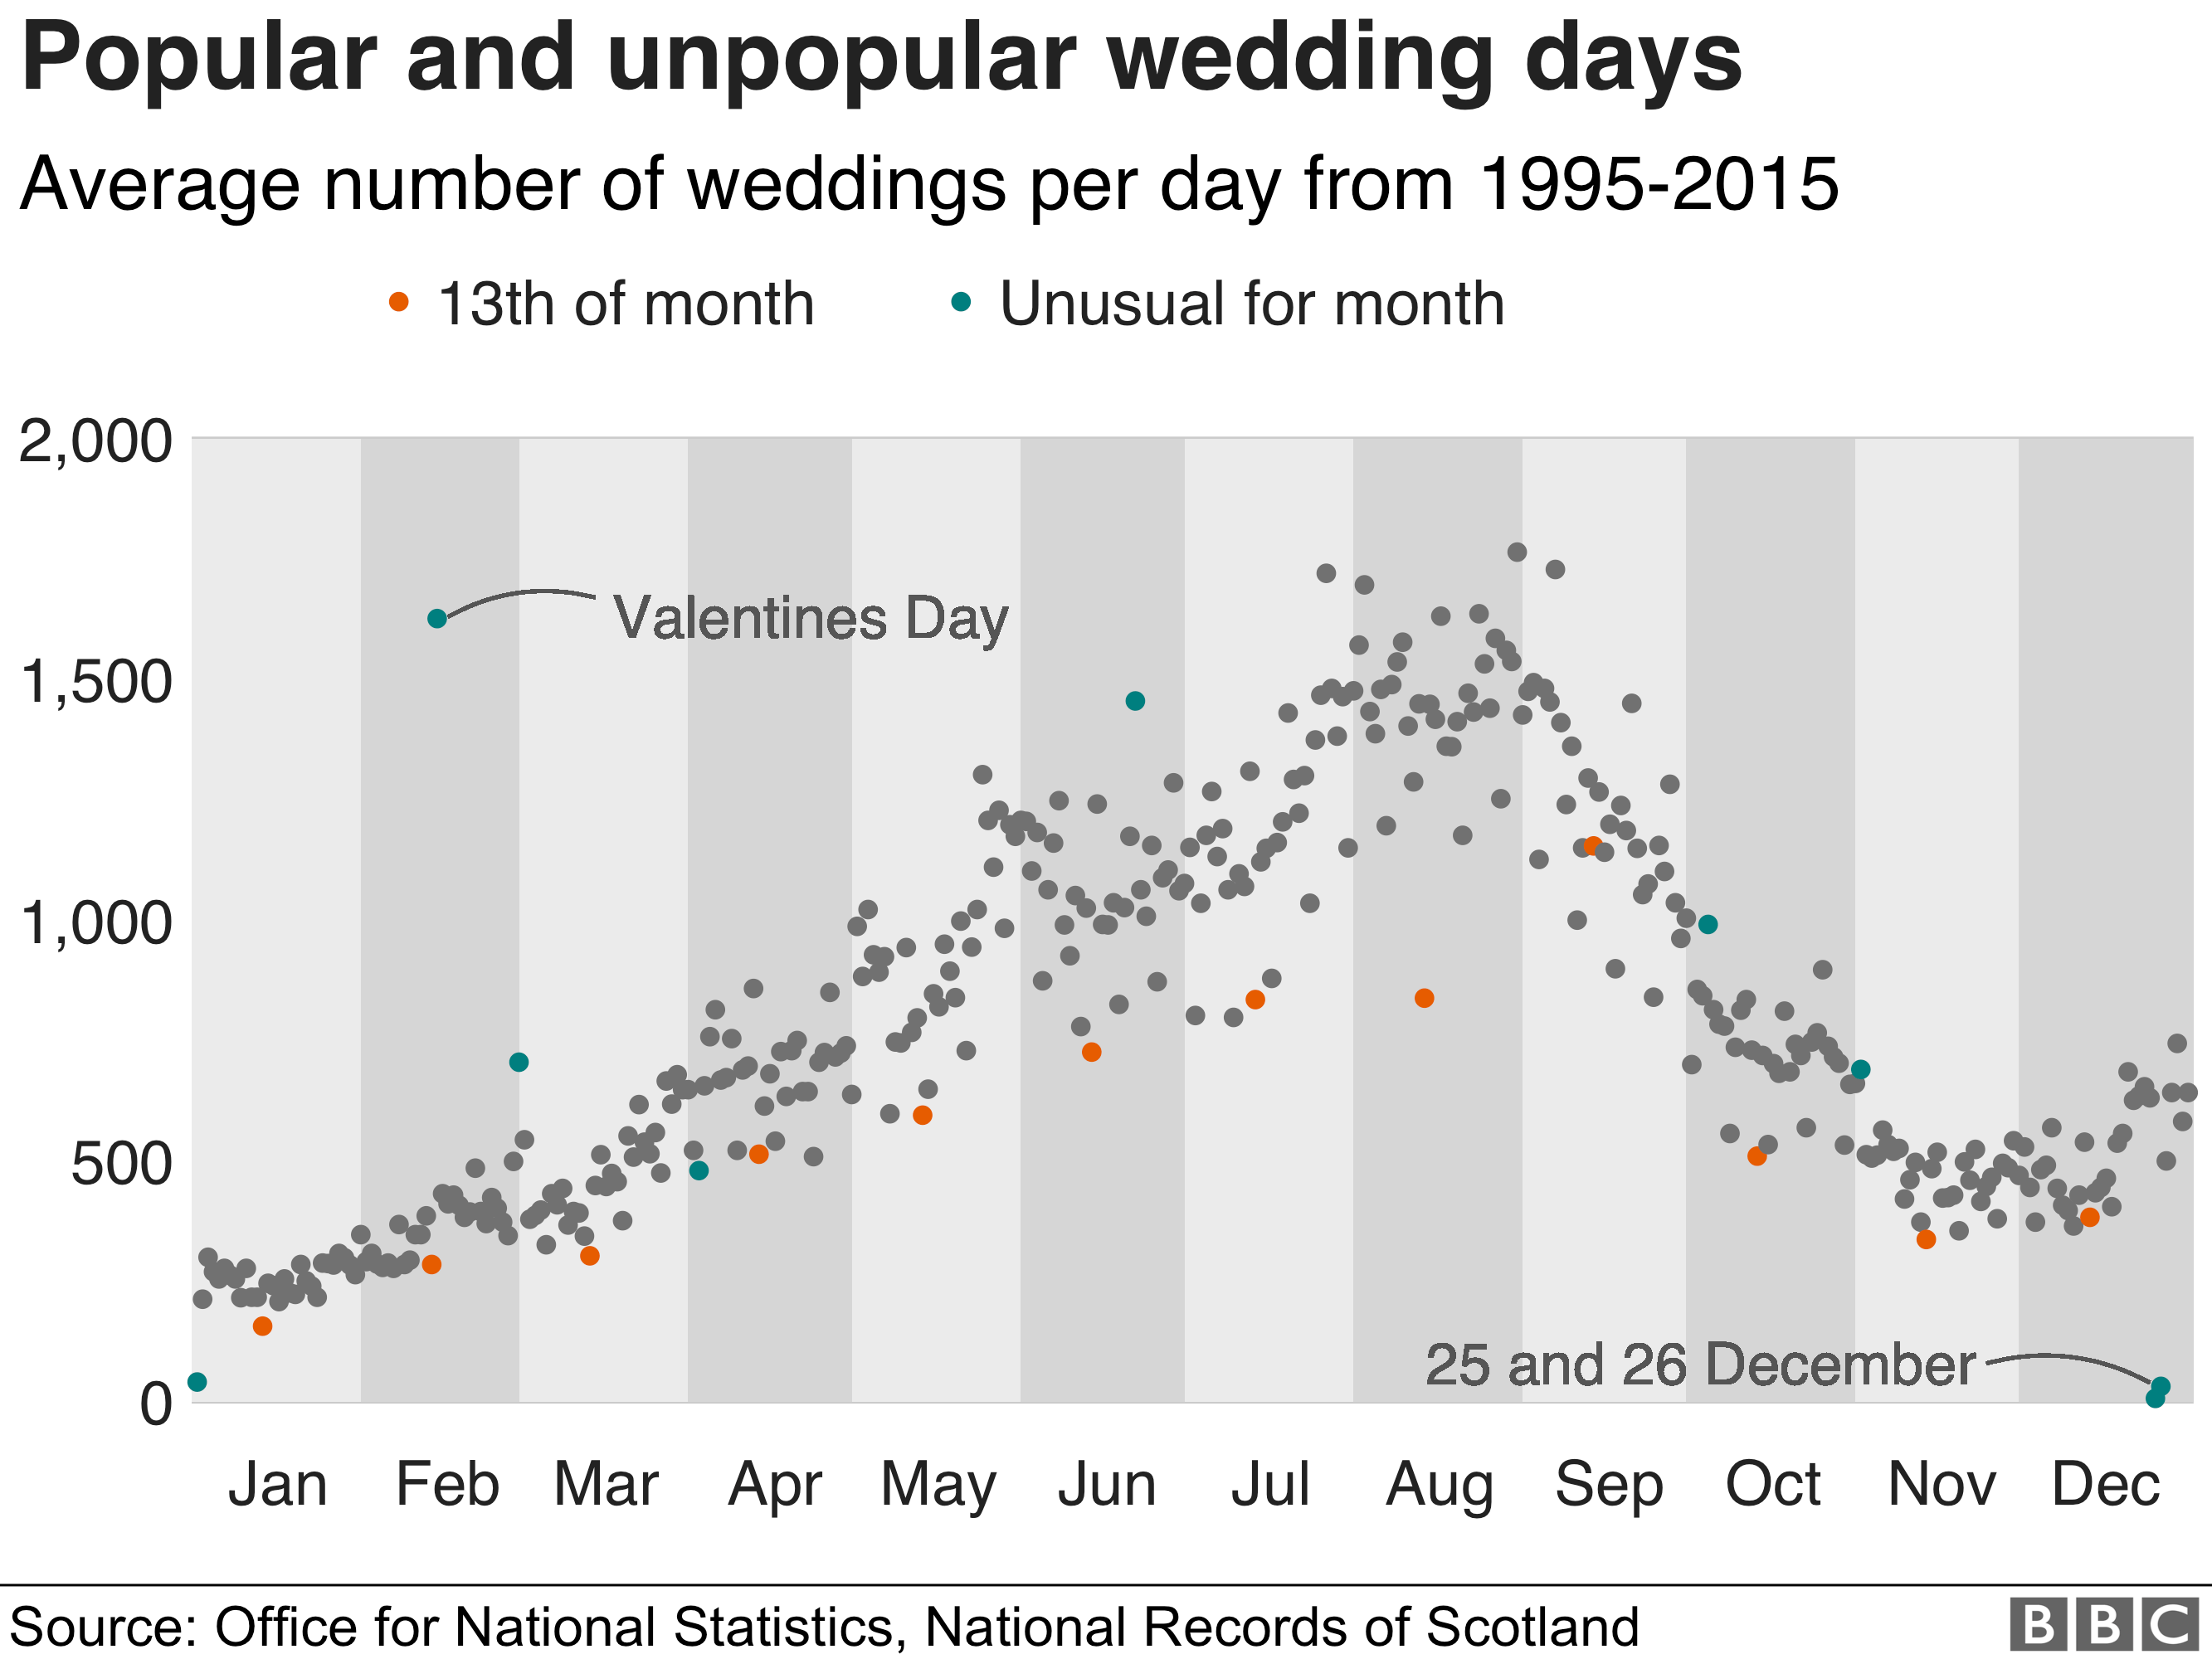 Chart showing average number of weddings per day, with 13th of month highlighted as unpopular and Valentine's Day highlighted as popular